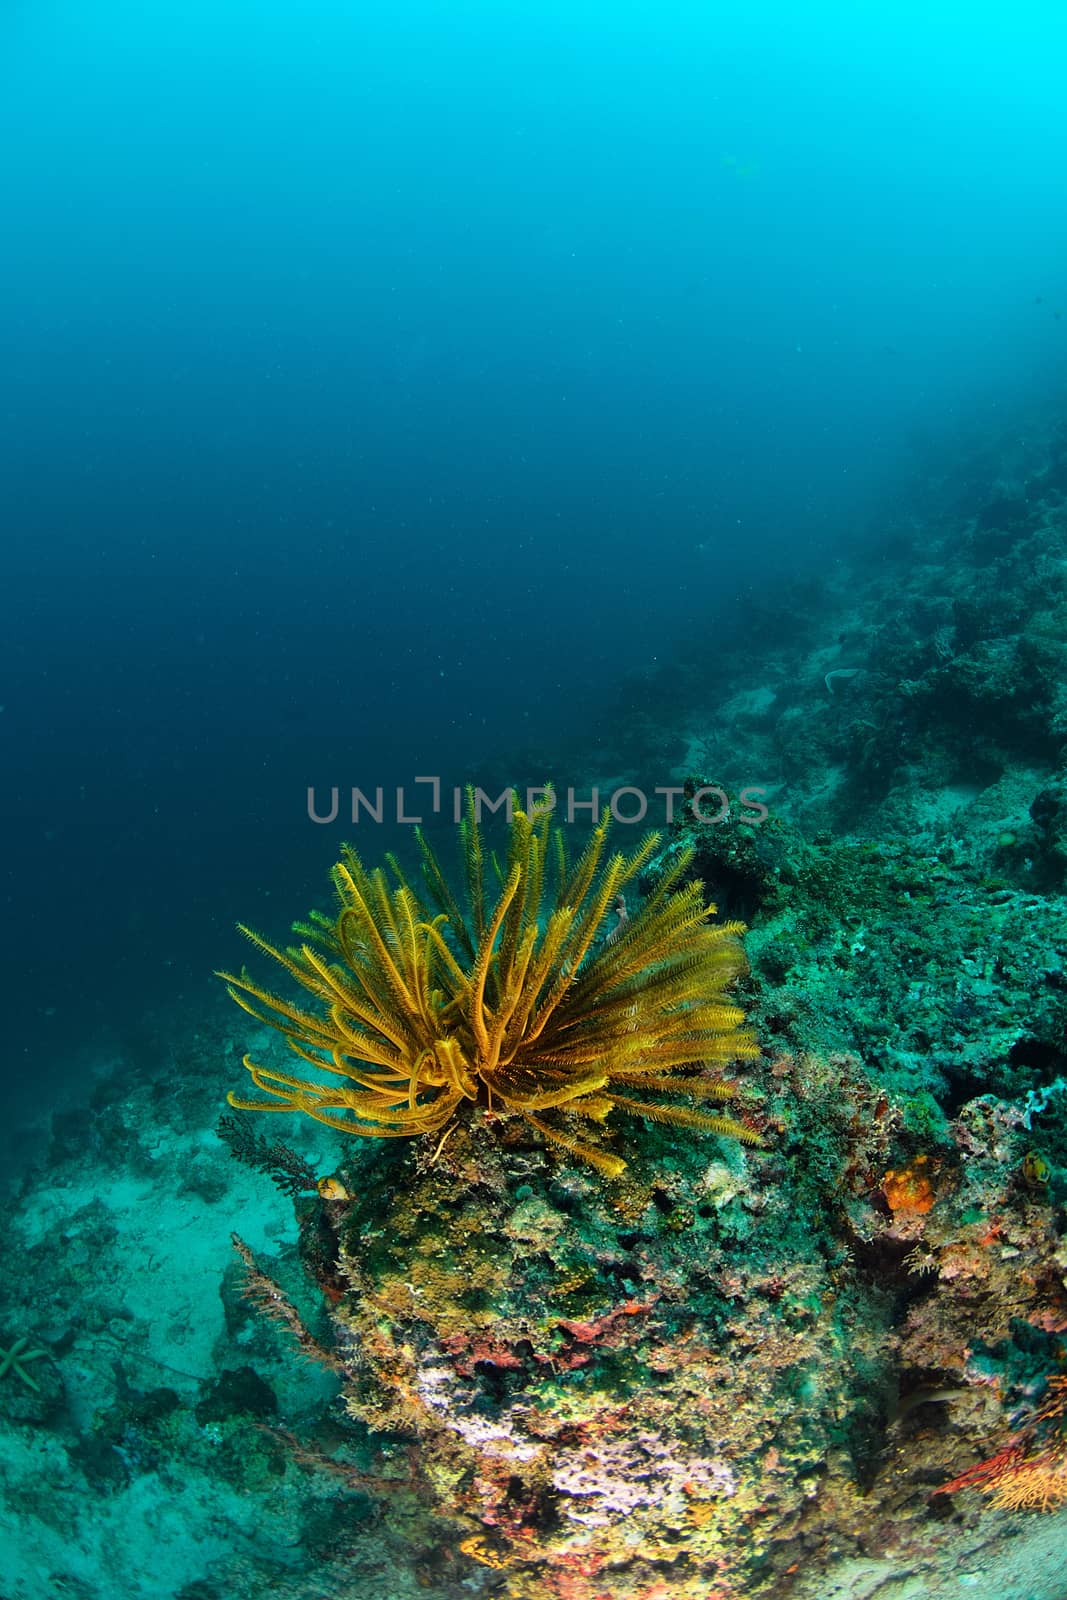 yellow feather starl in Mabul, Malaysia by think4photop